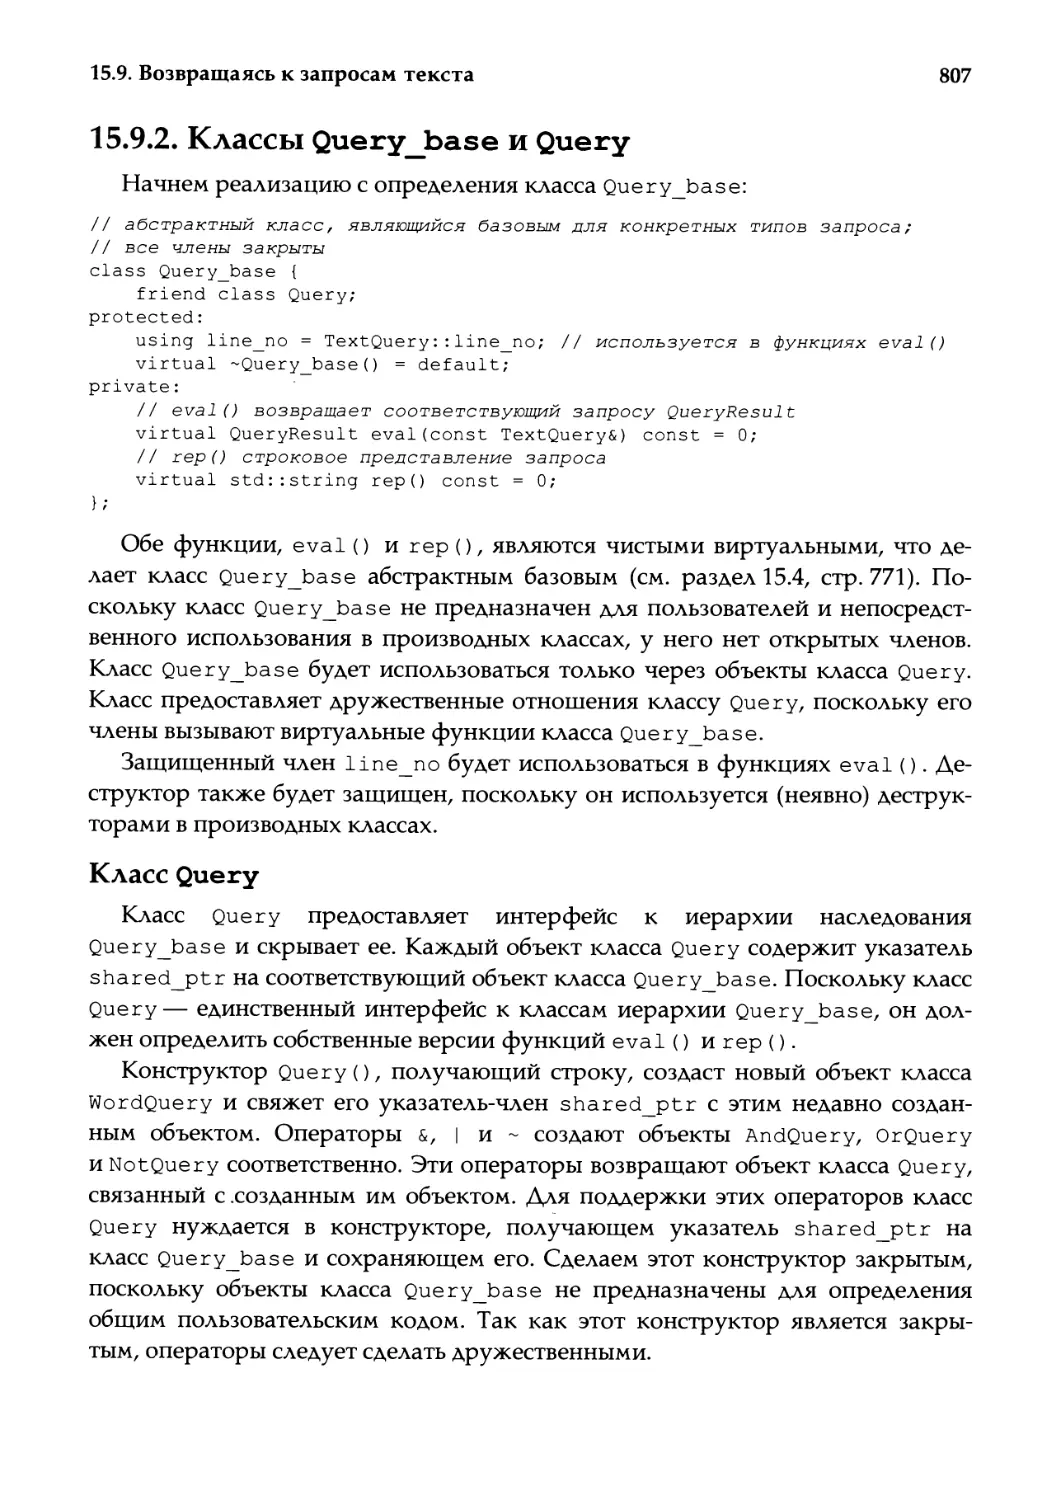 15.9.2. Классы Query_base и Query